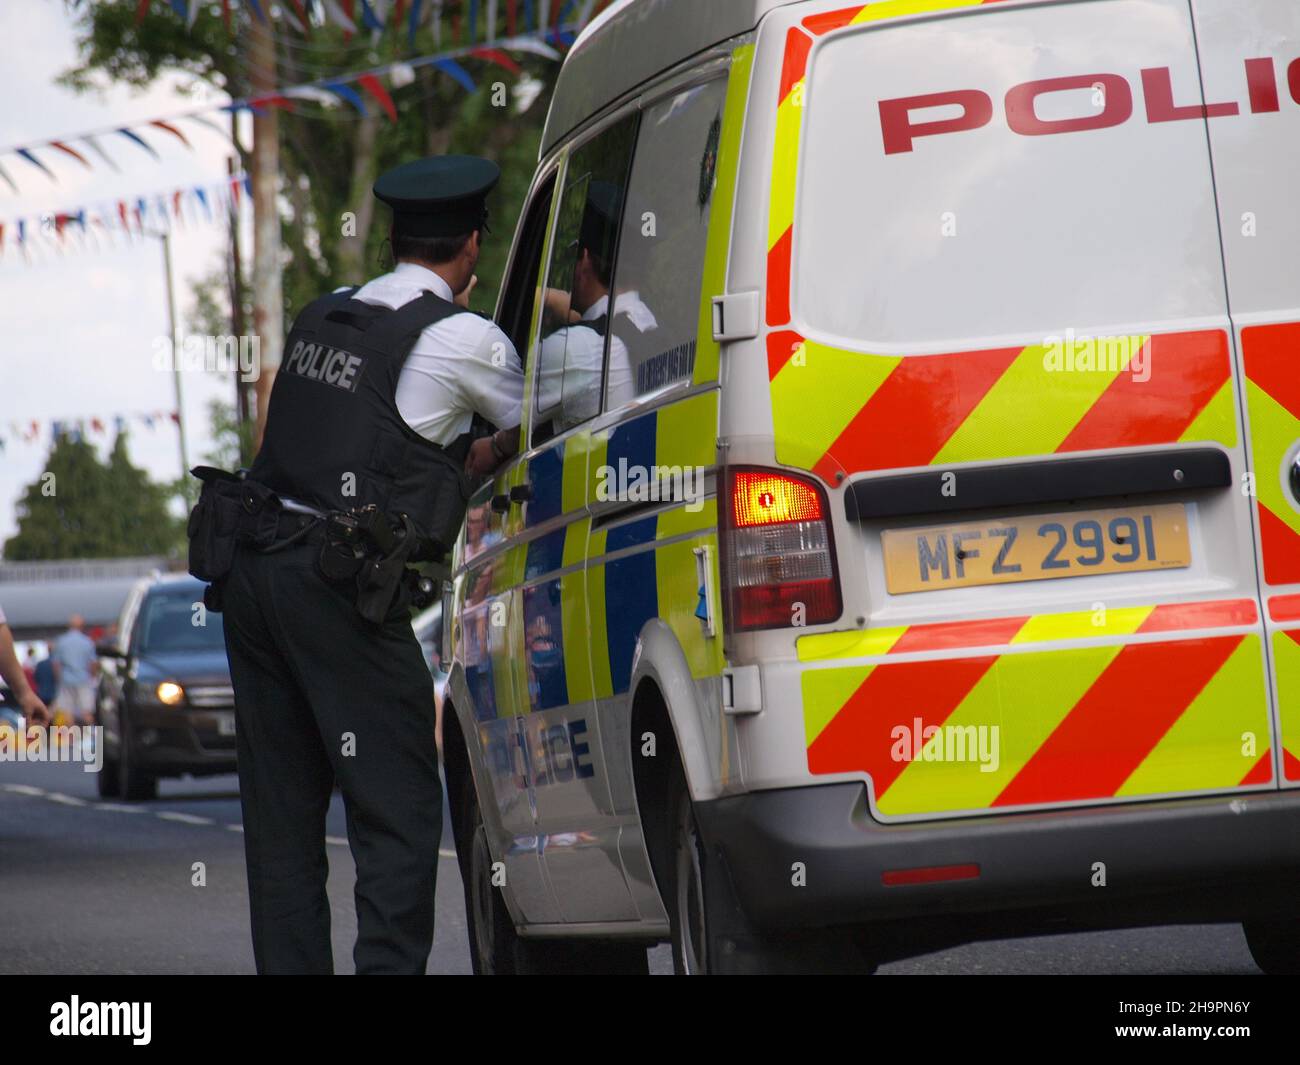 Police prepare for the 2017 12th July celebrations in Hillsborough, Northern Ireland in a 2013 model VW Transporter Stock Photo